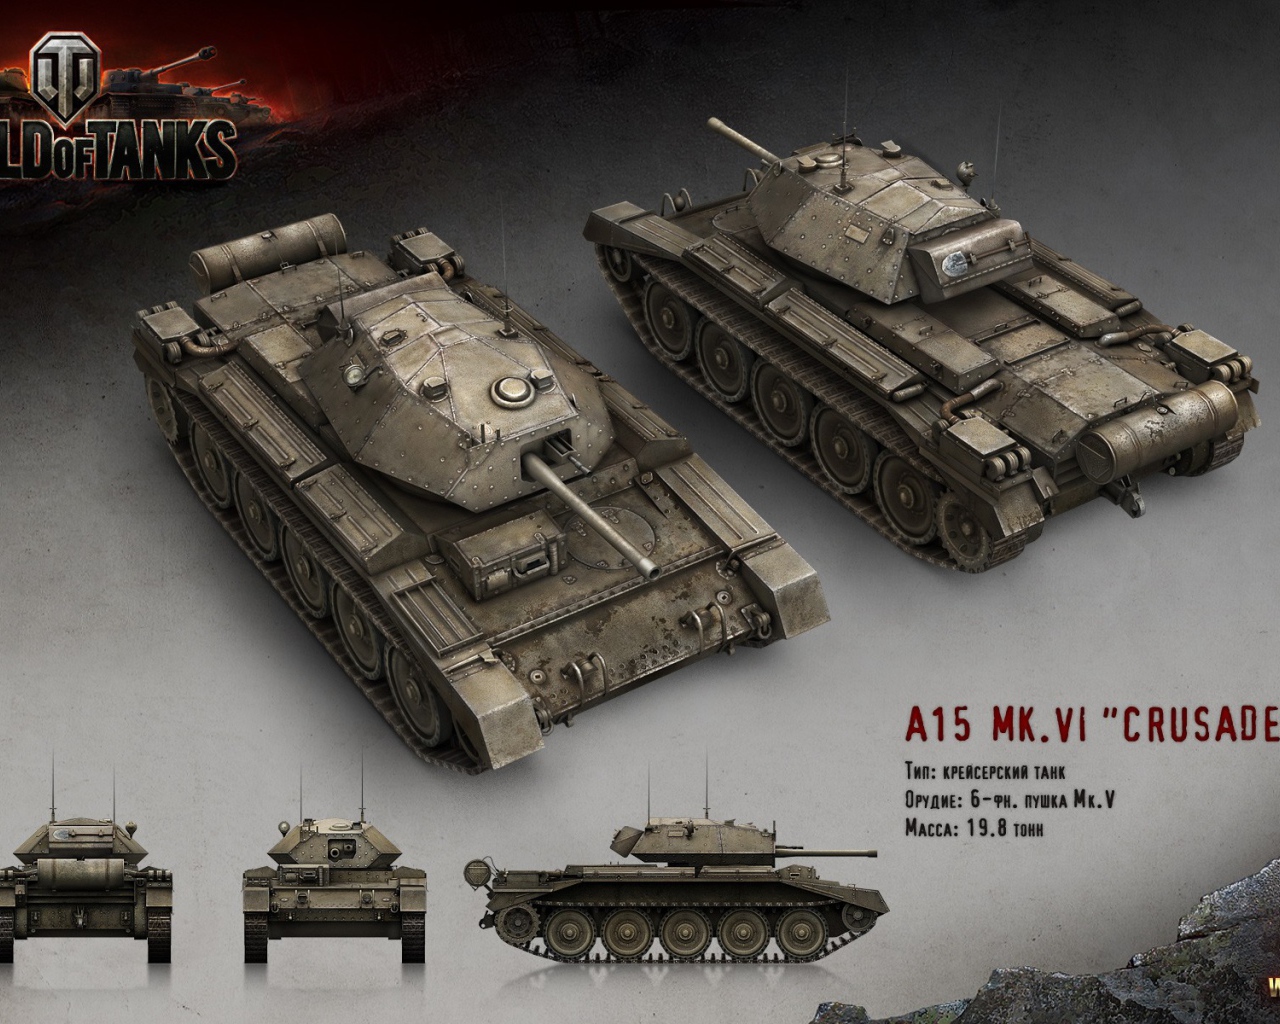 Tank A-15, the game World of Tanks